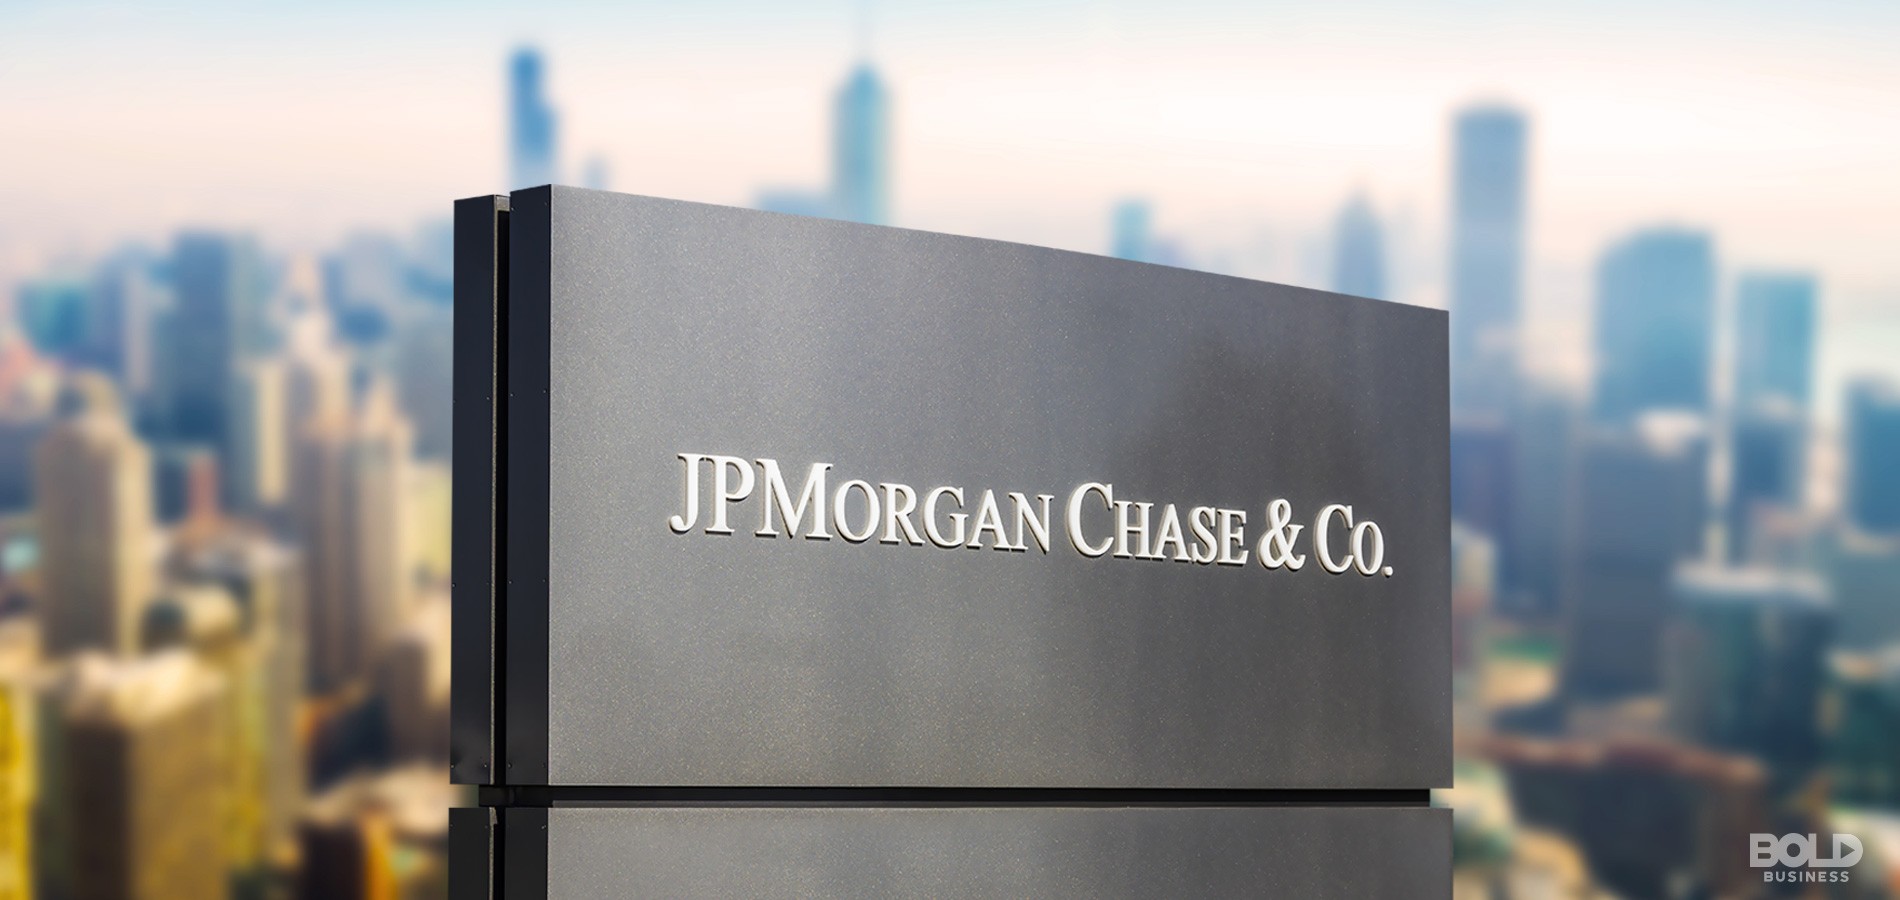 JPMorgan Chase Featured Image